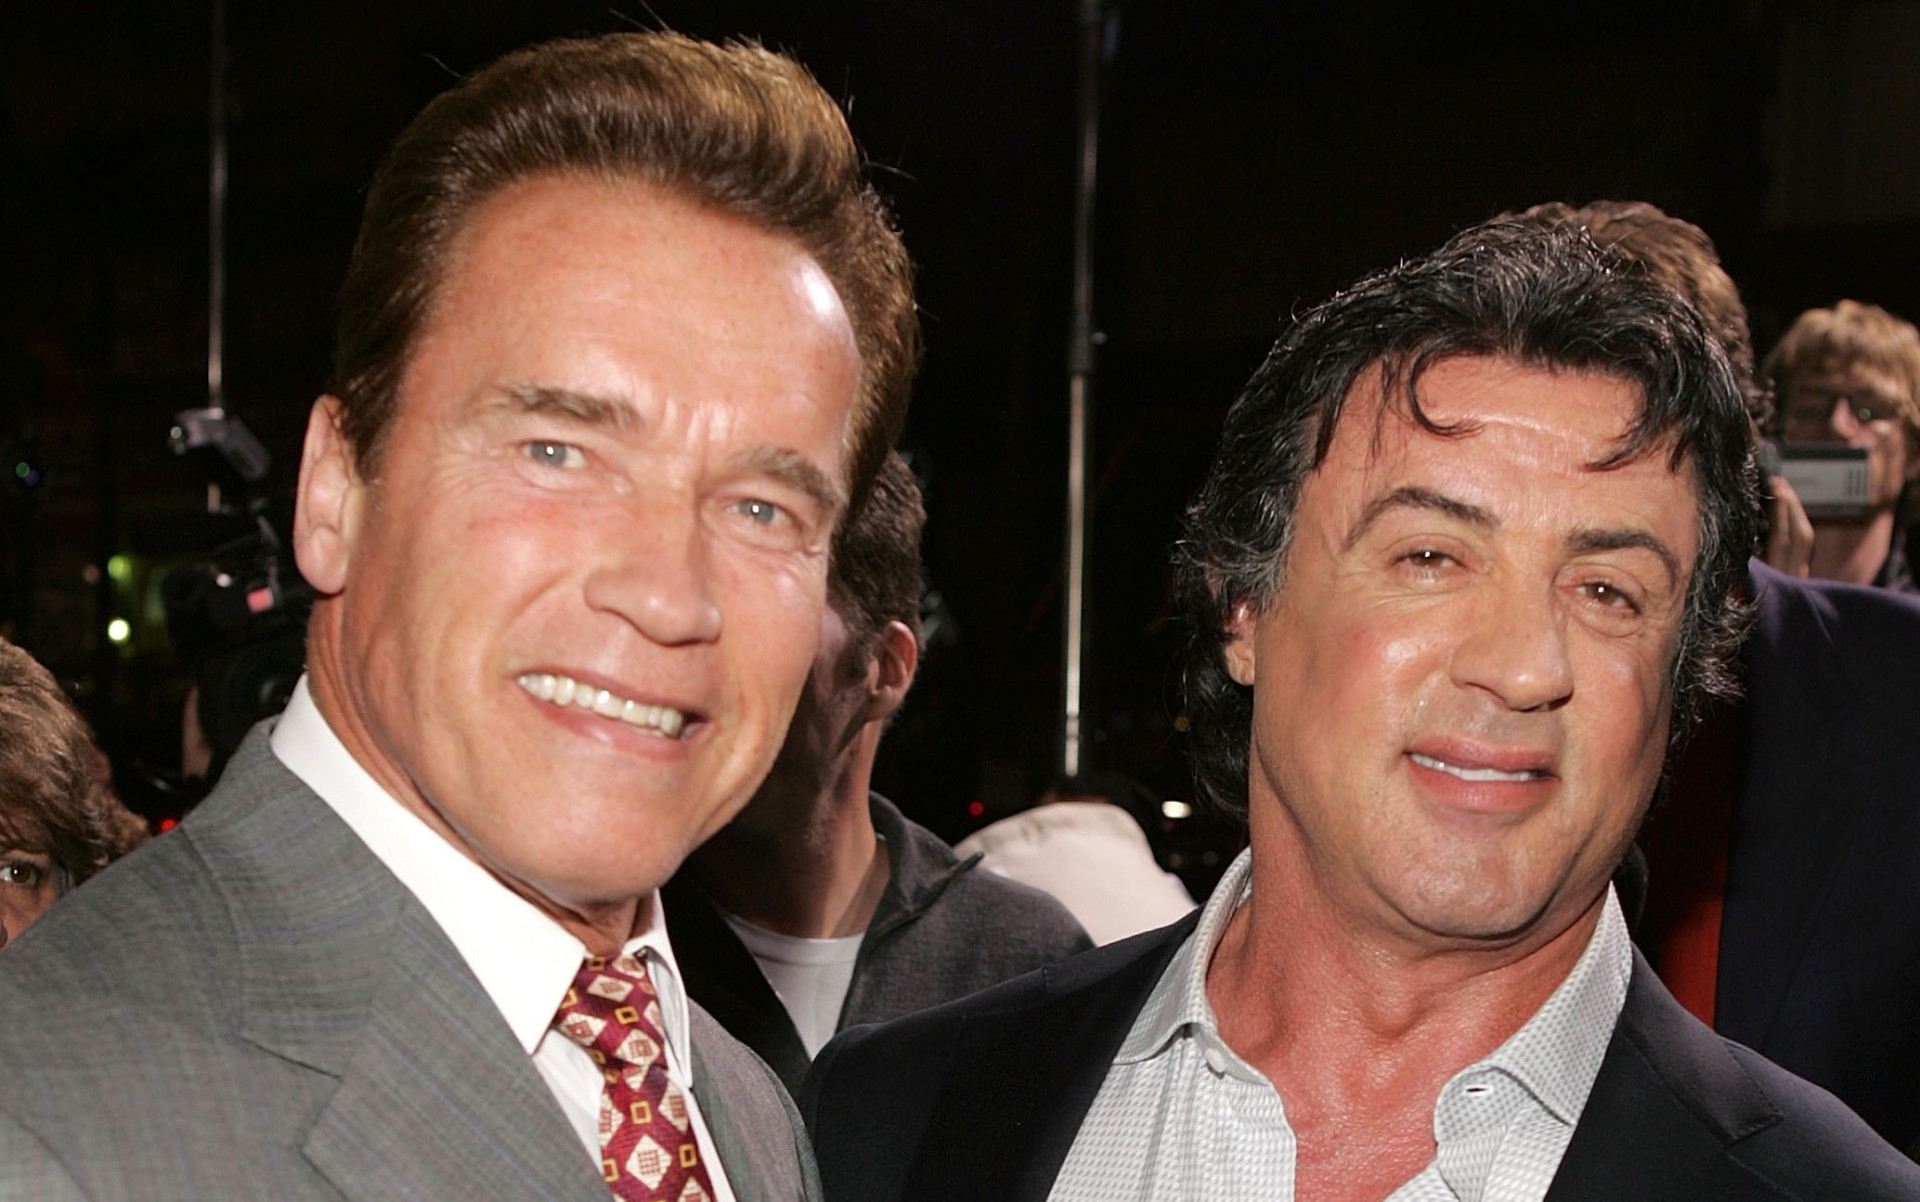 <p>Sylvester Stallone and Arnold Schwarzenegger have developed a close friendship in recent years, despite once having a strong dislike for each other. The two action stars, famous for their roles in movies like 'The Expendables' and 'Escape Plan', were actually fierce competitors during the 1980s and 1990s. Stallone openly admitted in an interview with Forbes that they "really disliked each other immensely" during that time.</p> <p>Stallone added, “We were… this may sound a little vain, but I think we were pioneering a kind of genre at that time and it hasn’t been seen since really. So the competition, because it’s his nature, he is very competitive and so am I… and I just thought it actually helped, but off-screen we were still competitive and that was not a healthy thing at all, but we’ve become really good friends.”</p><p><a href="https://www.msn.com/en-us/community/channel/vid-7xx8mnucu55yw63we9va2gwr7uihbxwc68fxqp25x6tg4ftibpra?cvid=94631541bc0f4f89bfd59158d696ad7e">Follow us and access great exclusive content every day</a></p>